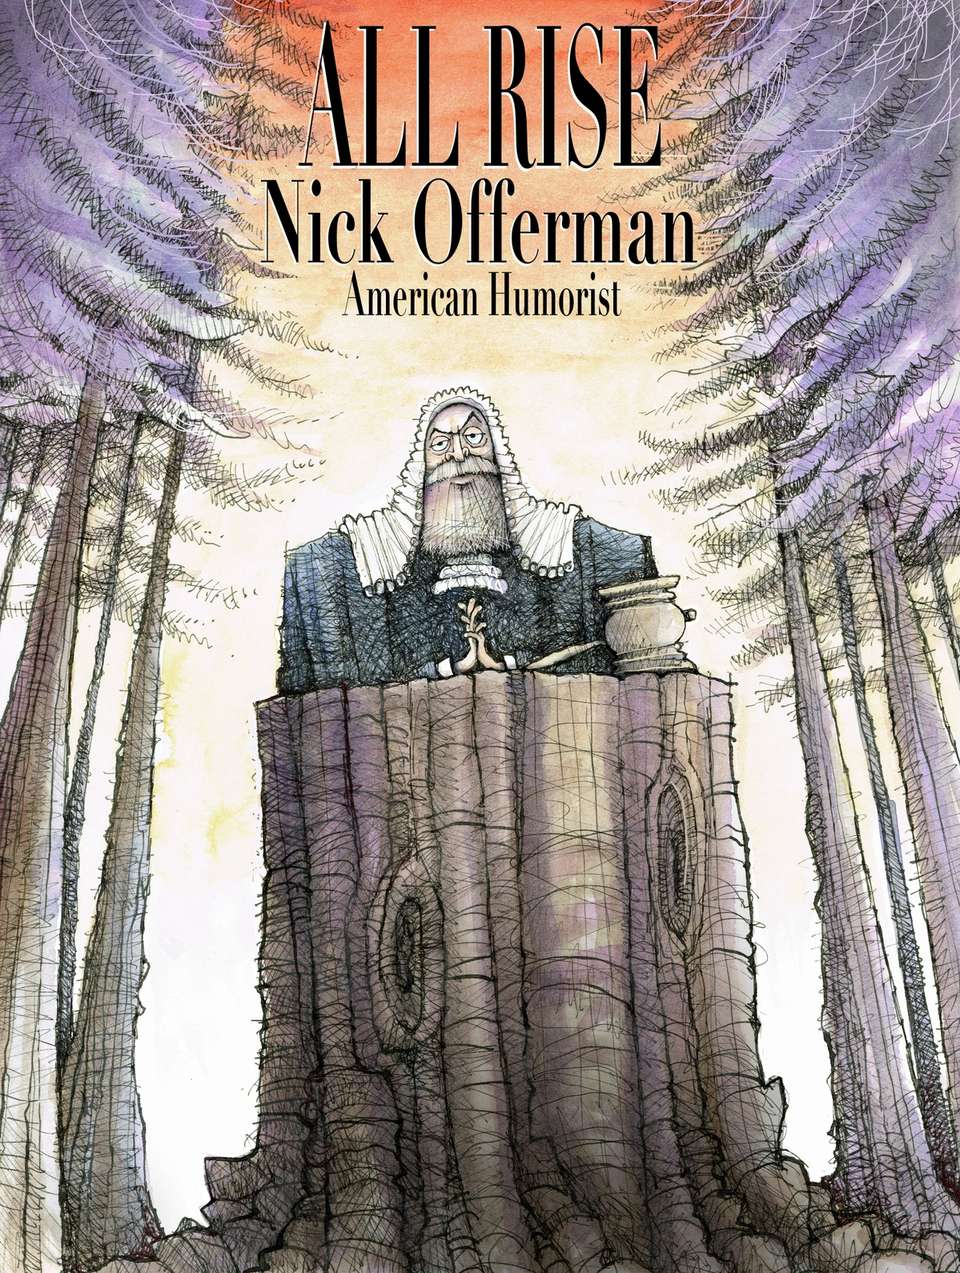 Tour poster illustration depicting Nick Offerman as a judge in a forest